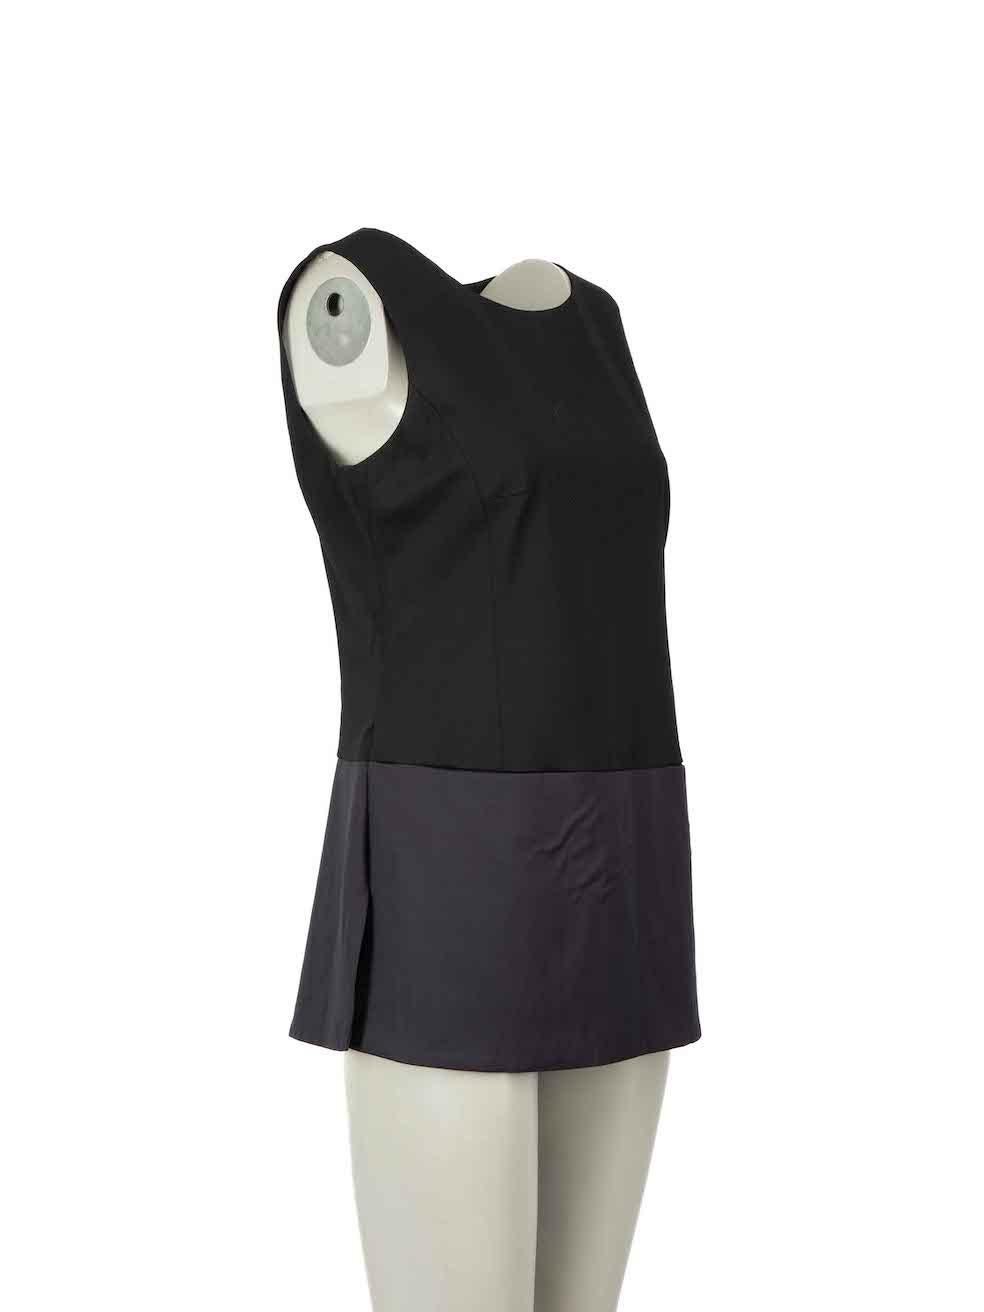 CONDITION is Very good. Minimal wear to top is evident. Minimal wear to button attachments which appear slightly loose on this used Jil Sander designer resale item.

Details
Black
Wool
Top
Sleeveless
Round neck
Navy panel
Open sides
Open ended side